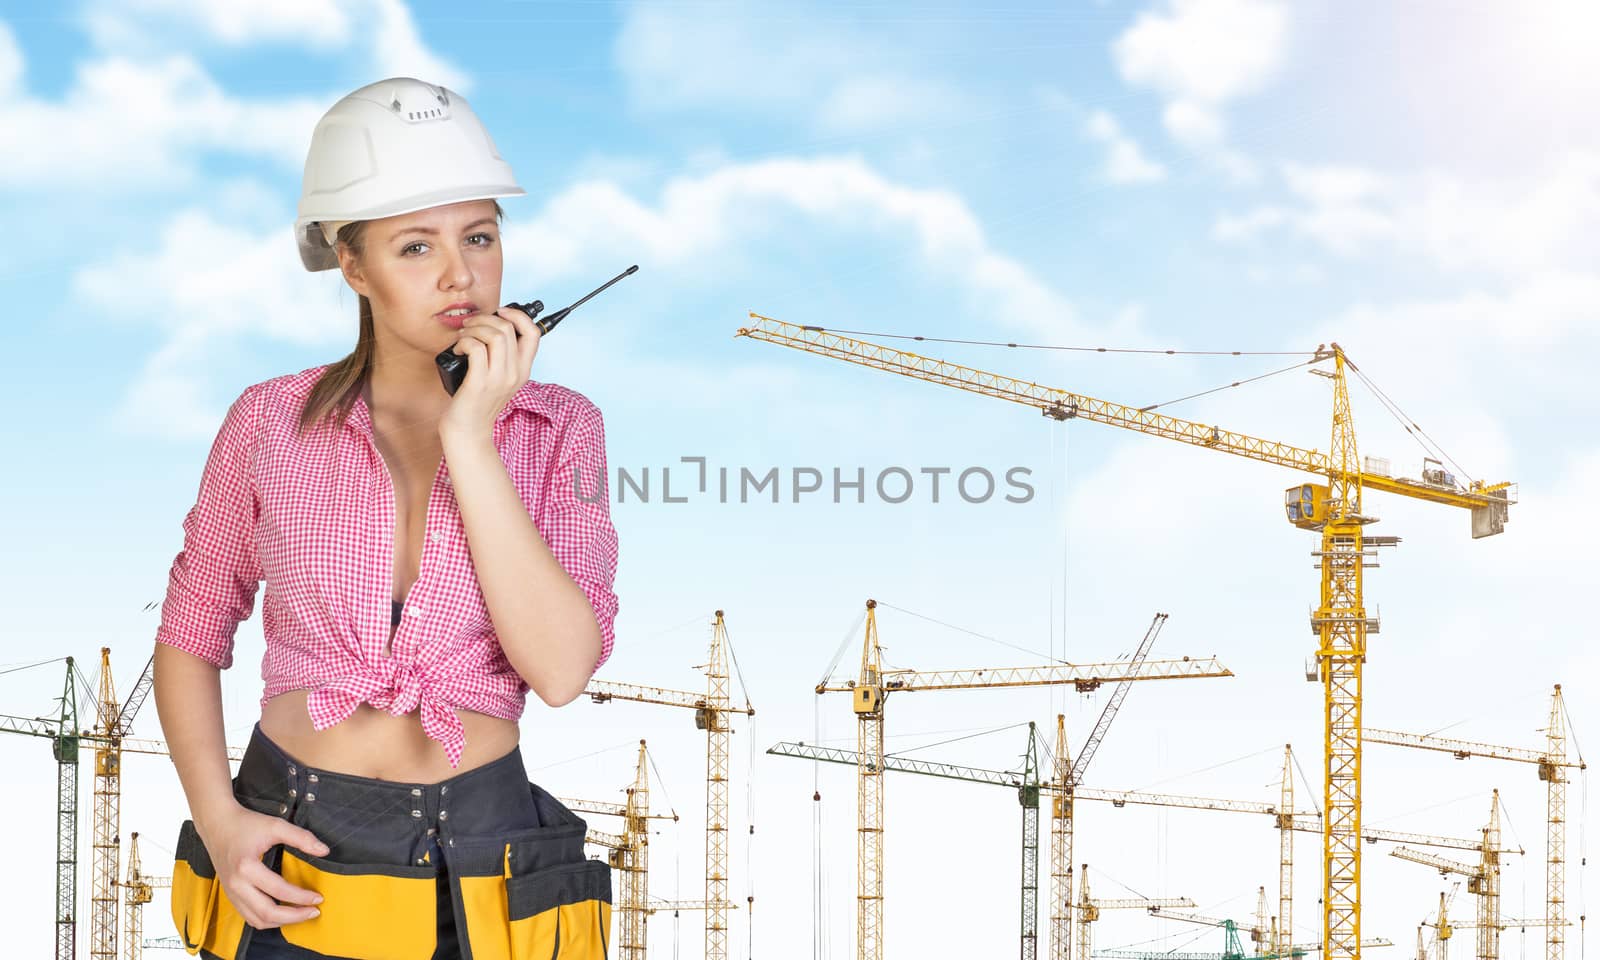 Woman in hard hat and tool belt talking on walkie talkie, looking at camera. Sky, clouds and tower cranes as backdrop